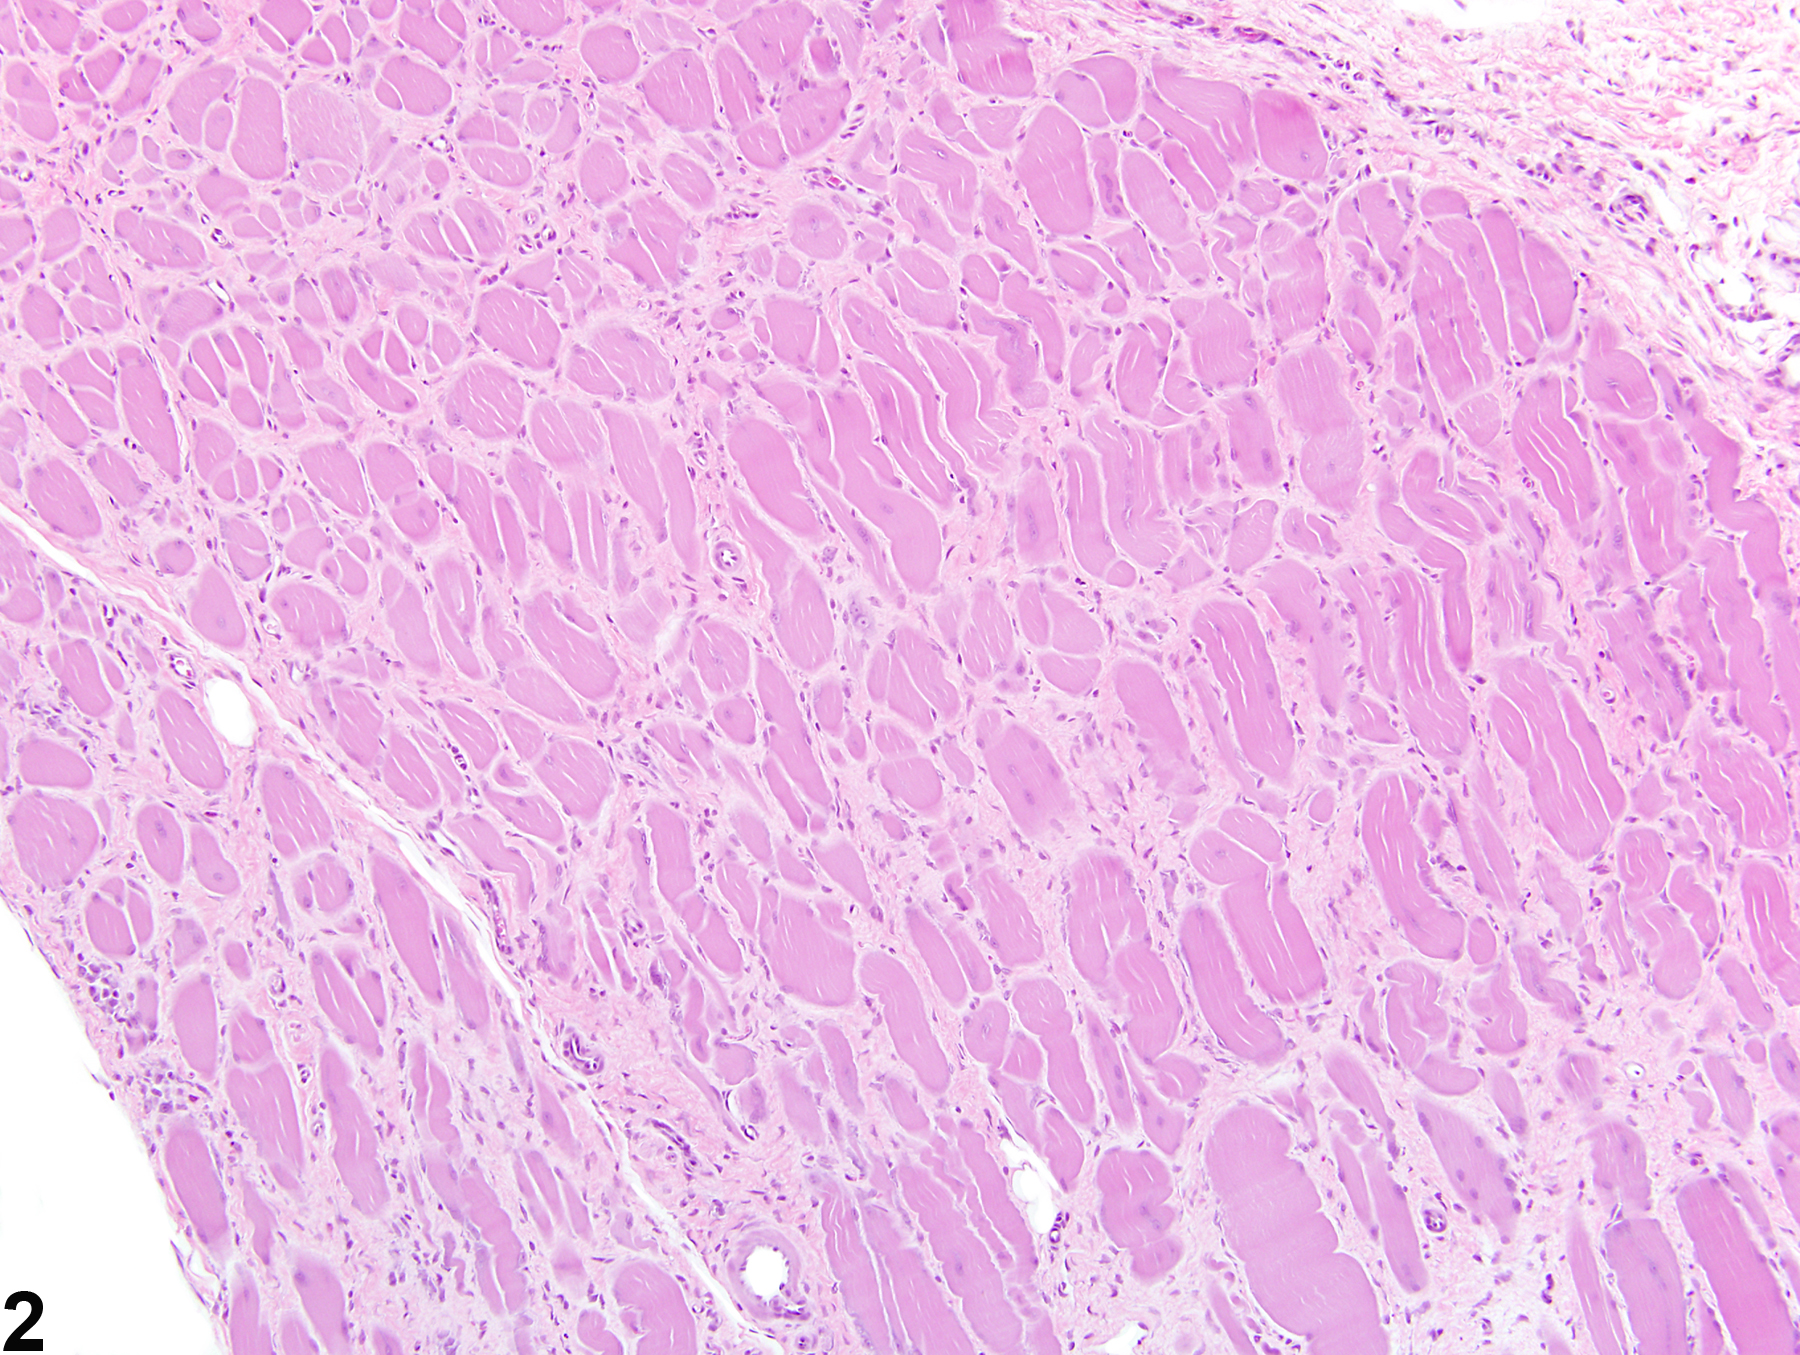 Image of fibrosis in the skeletal muscle from a male Harlan Sprague-Dawley rat in a subchronic study